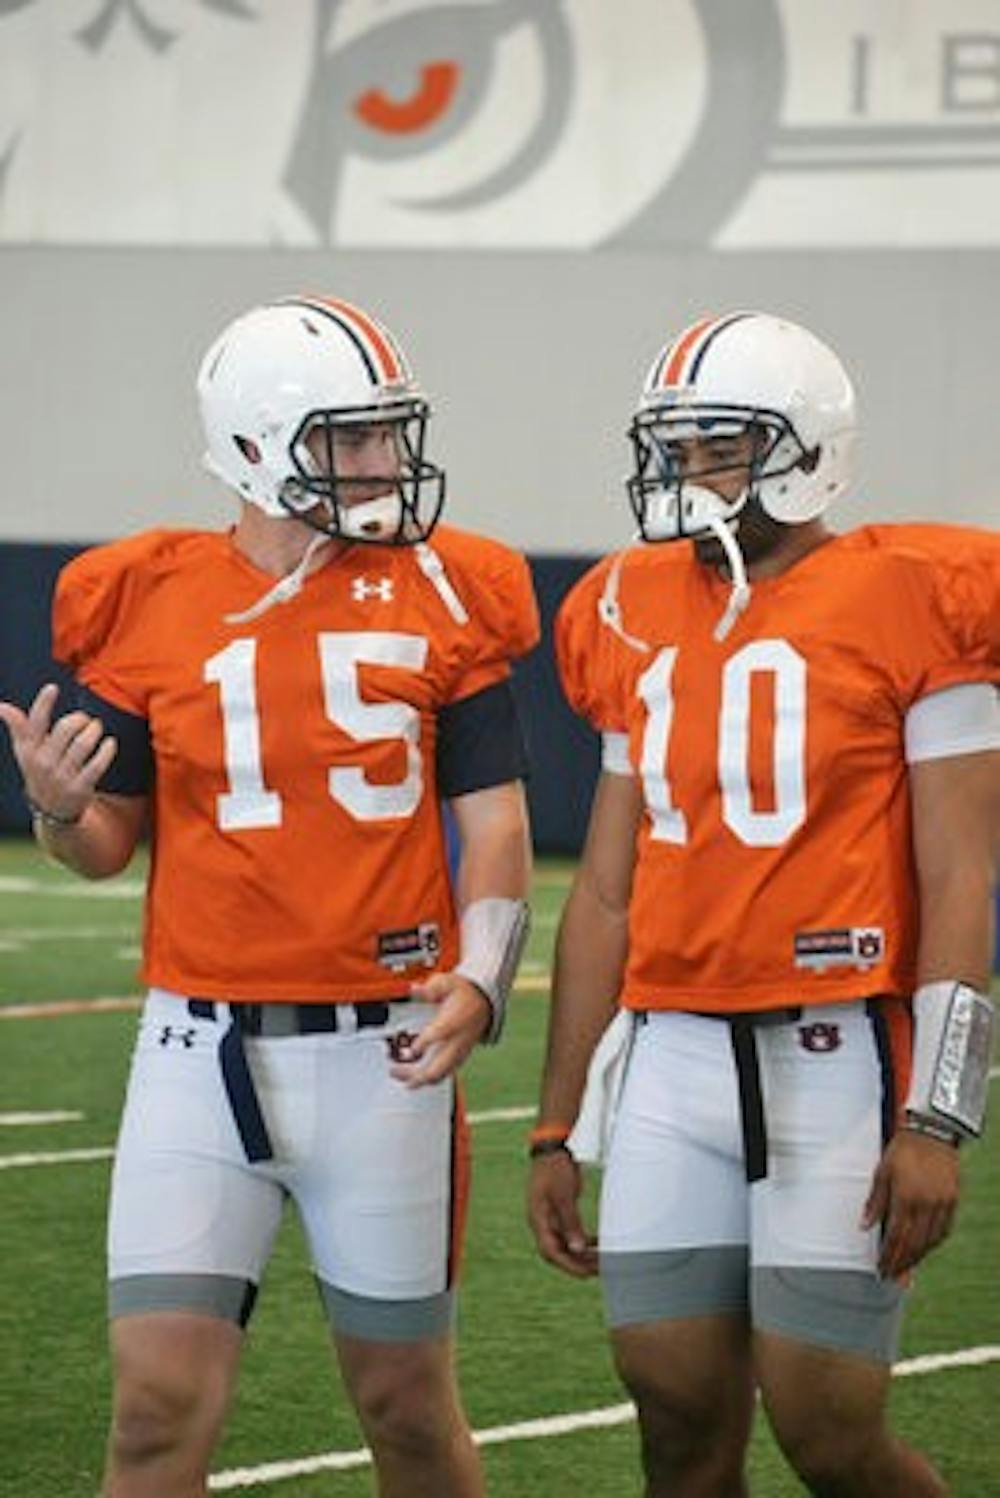 Clint Moseley (left) and Kiehl Frazier (right) talk before practice on August 3. (Danielle Lowe / PHOTO EDITOR)